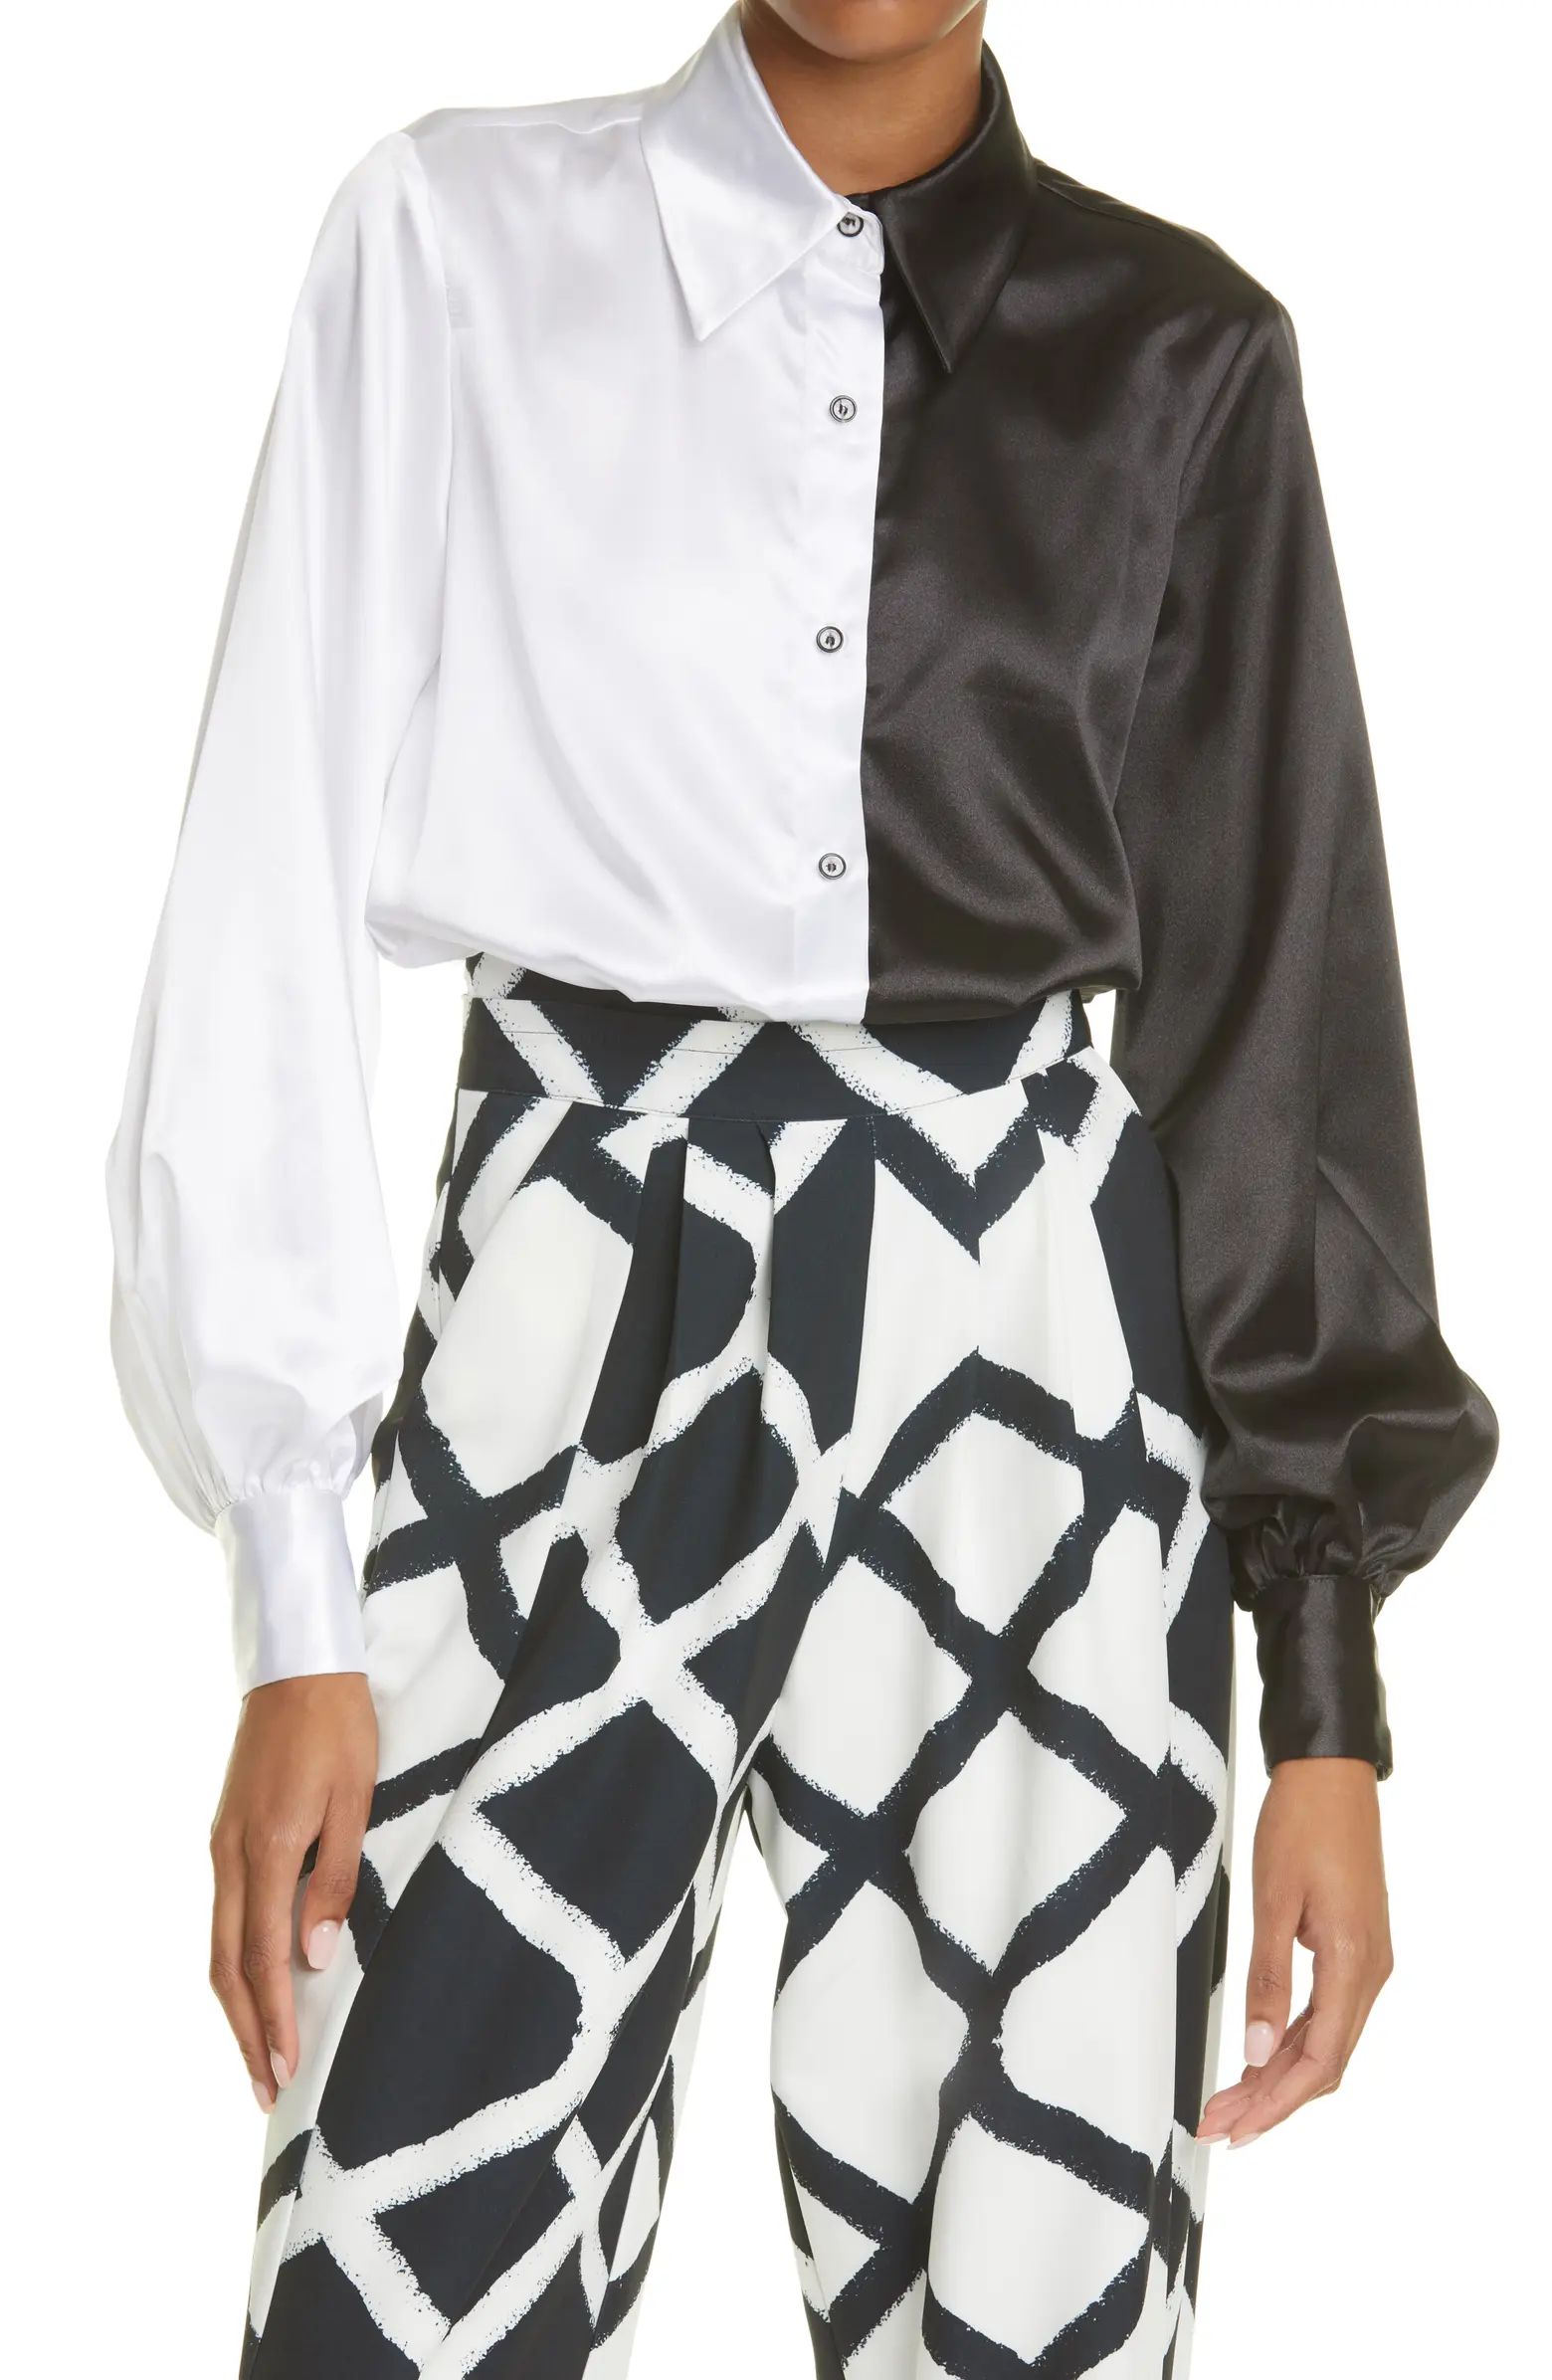 Kimberly Goldson Nia Colorblock Blouse | Nordstrom | Nordstrom